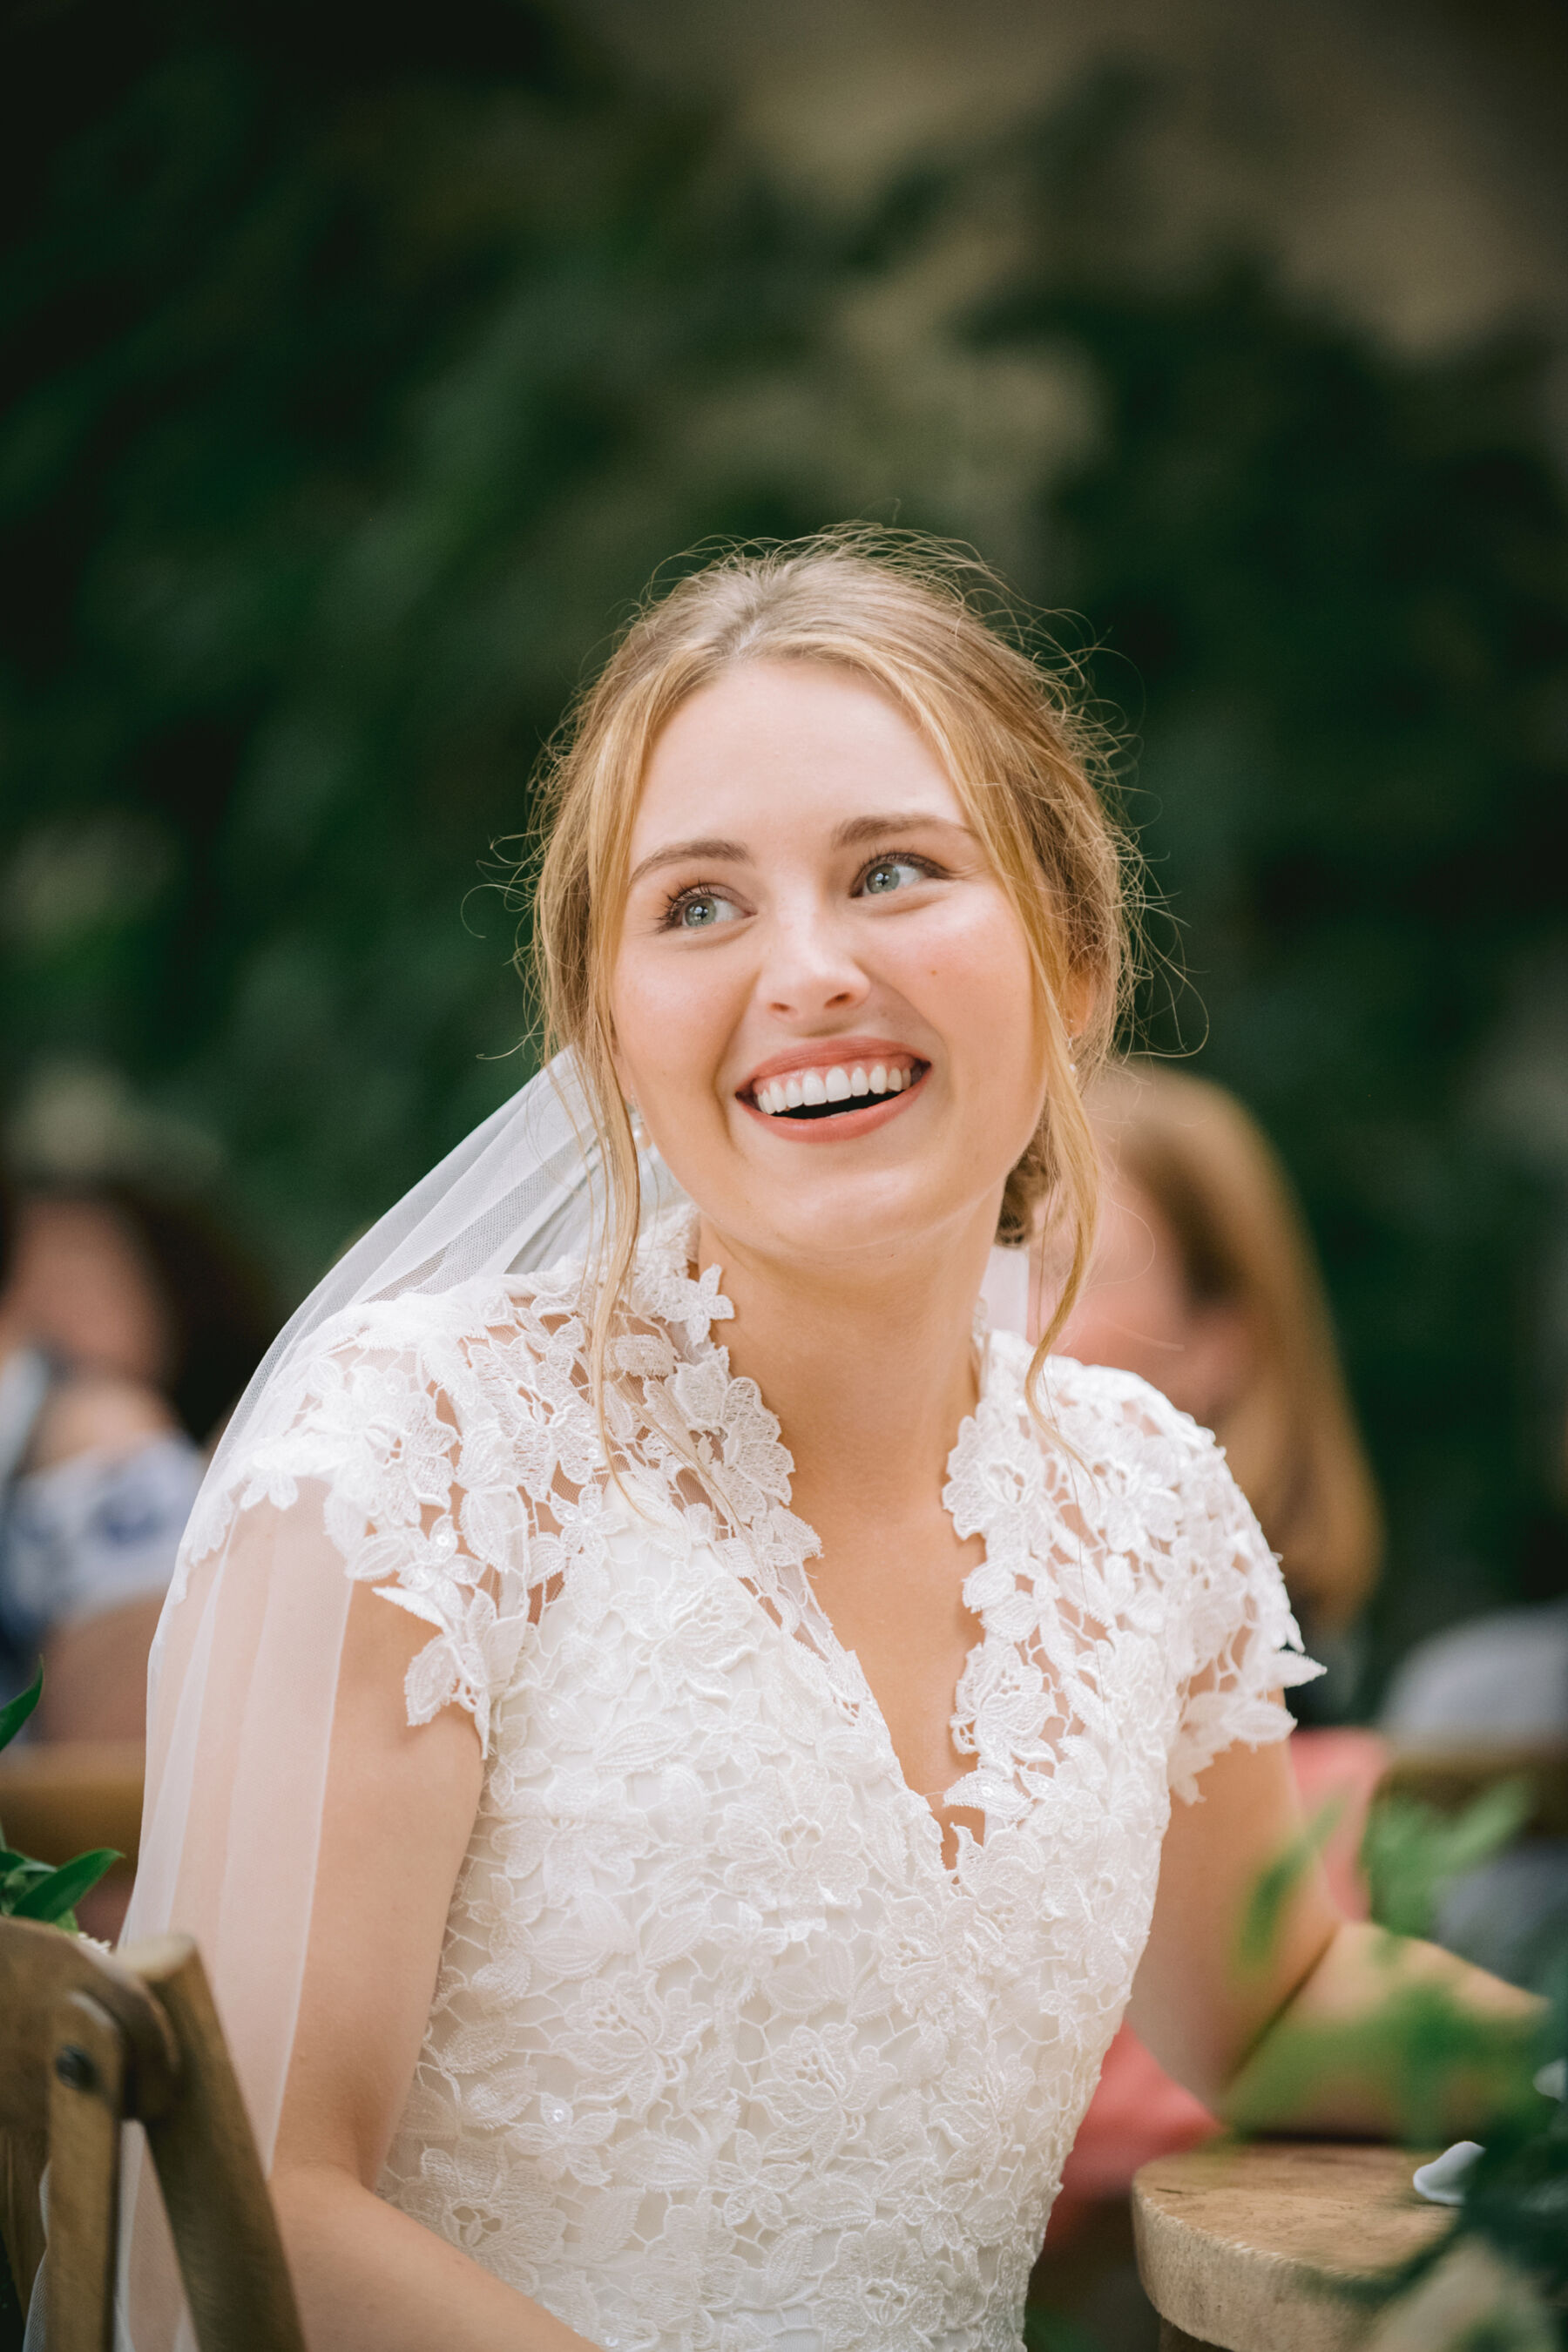 Bride smiling as she watches groom giving a speech.